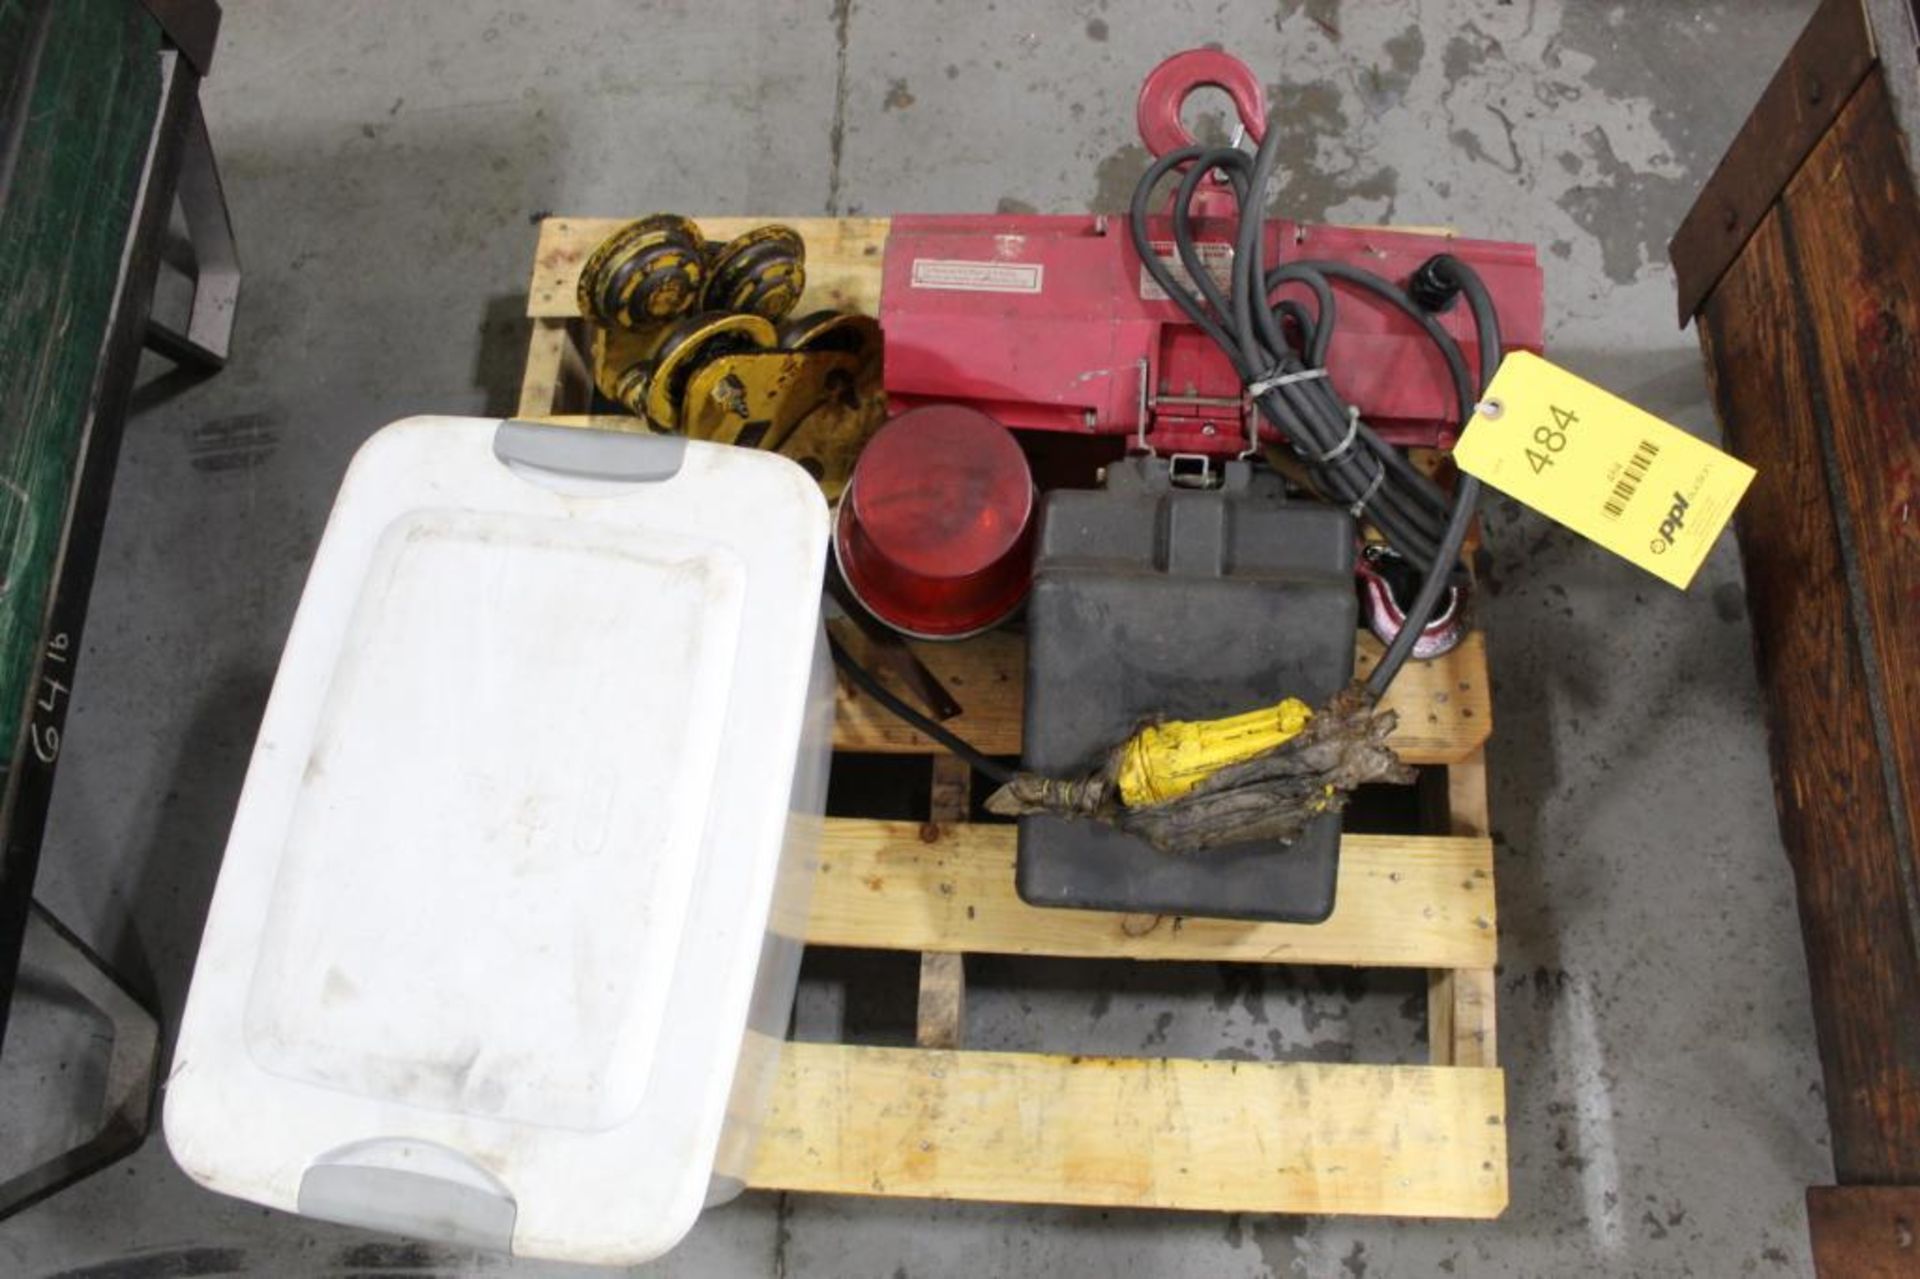 LOT: DAYTON 1/2 TON ELECTRIC CHAIN HOIST, WITH TROLLEY